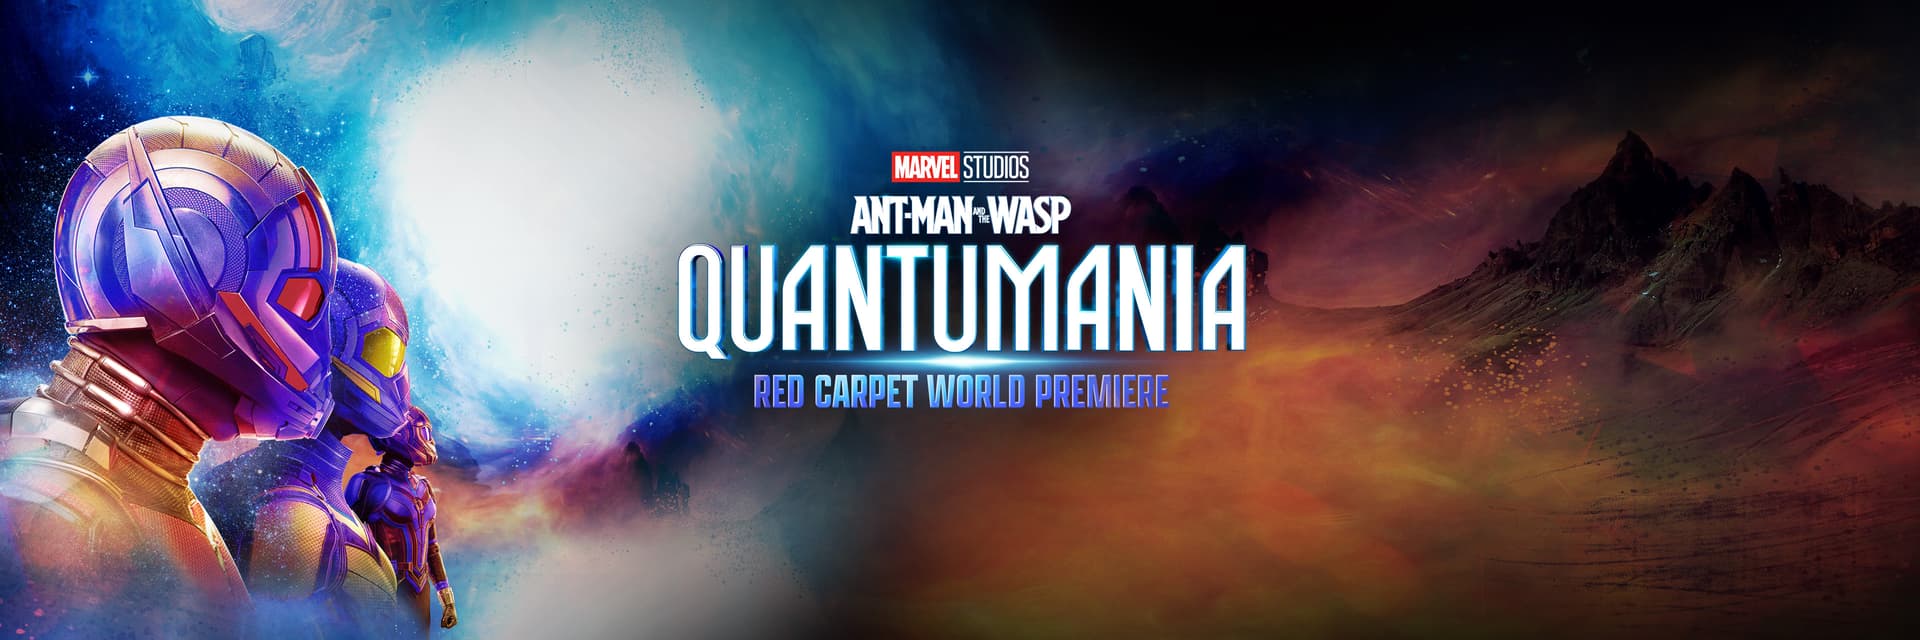 Ant-Man and The Wasp: Quantumania Live Red Carpet Premiere